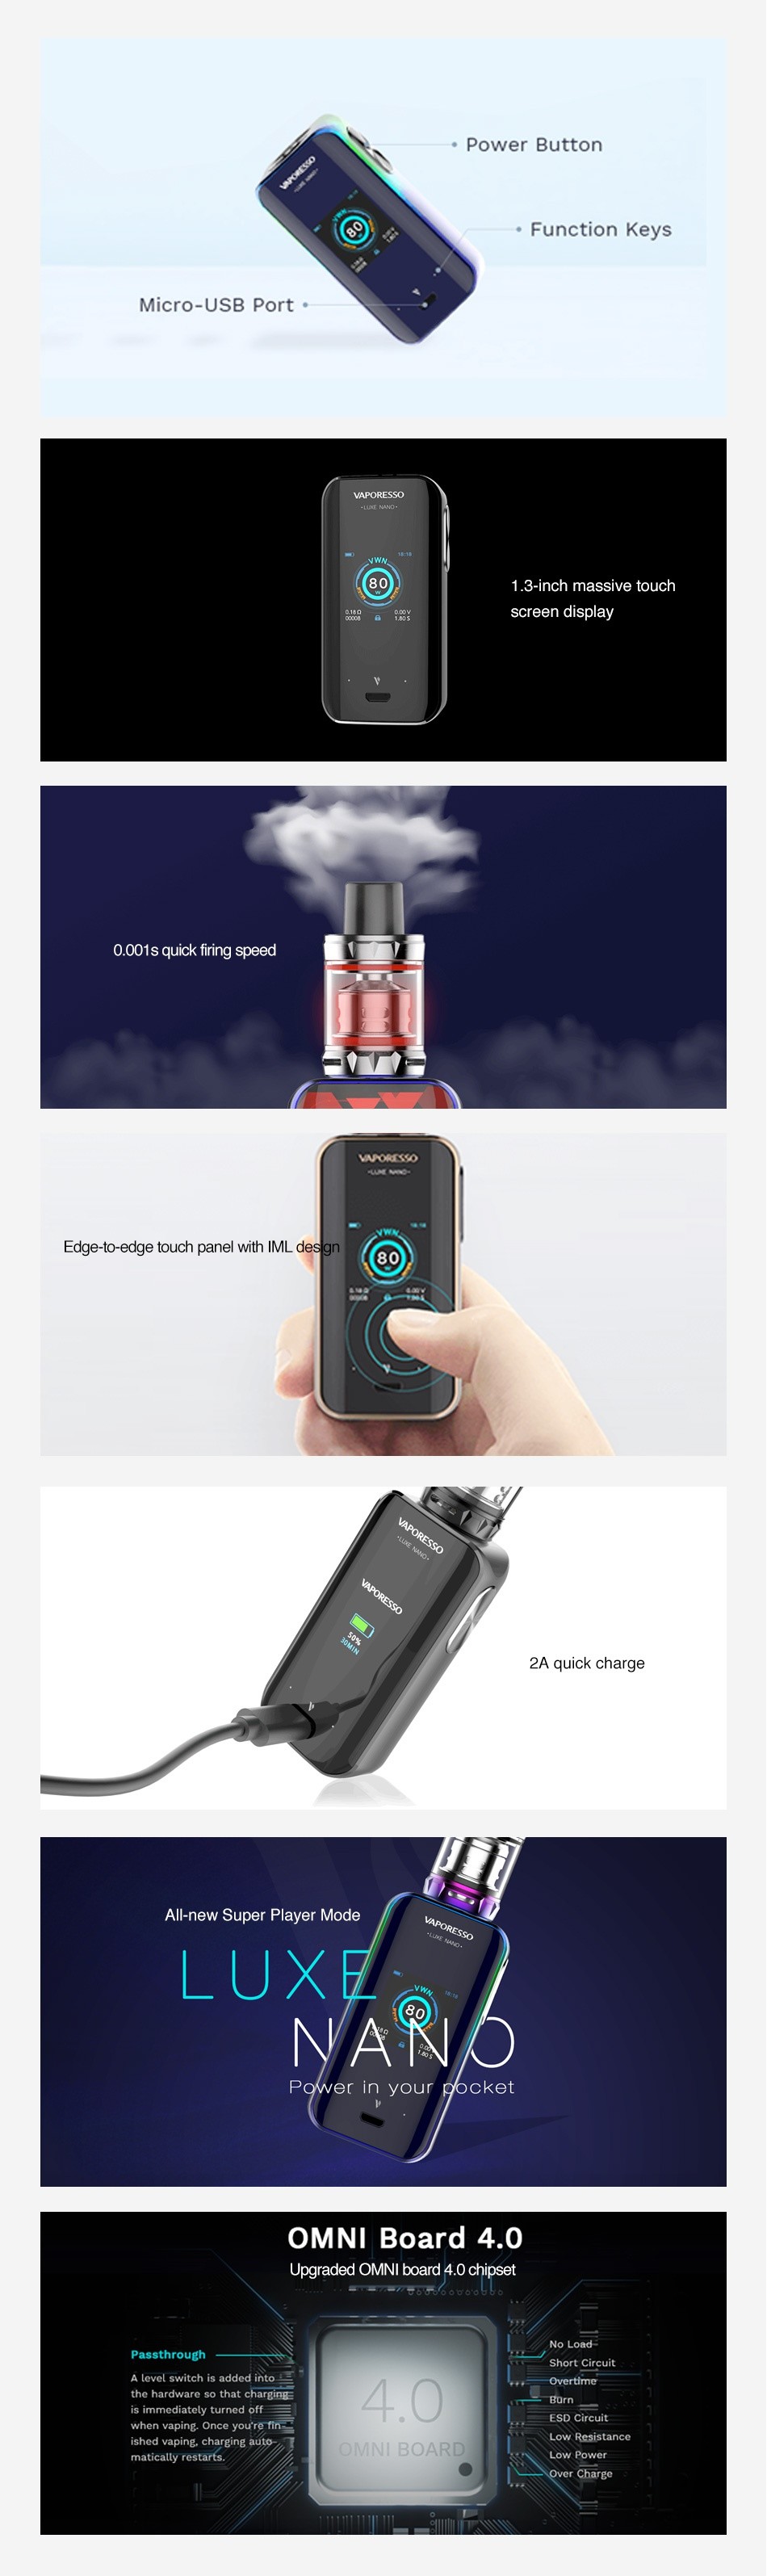 Vaporesso Luxe Nano 80W Touch Screen TC MOD 2500mAh Power Button Function Keys icro USB Port 3 inch massive touch 0 001s quick firing speed Edge bmrecge touch panel with IML All new Super Player Made L   NA oMNI Board 4 0 Upgraded OMNI board 4 0 chipset had vaping  charging